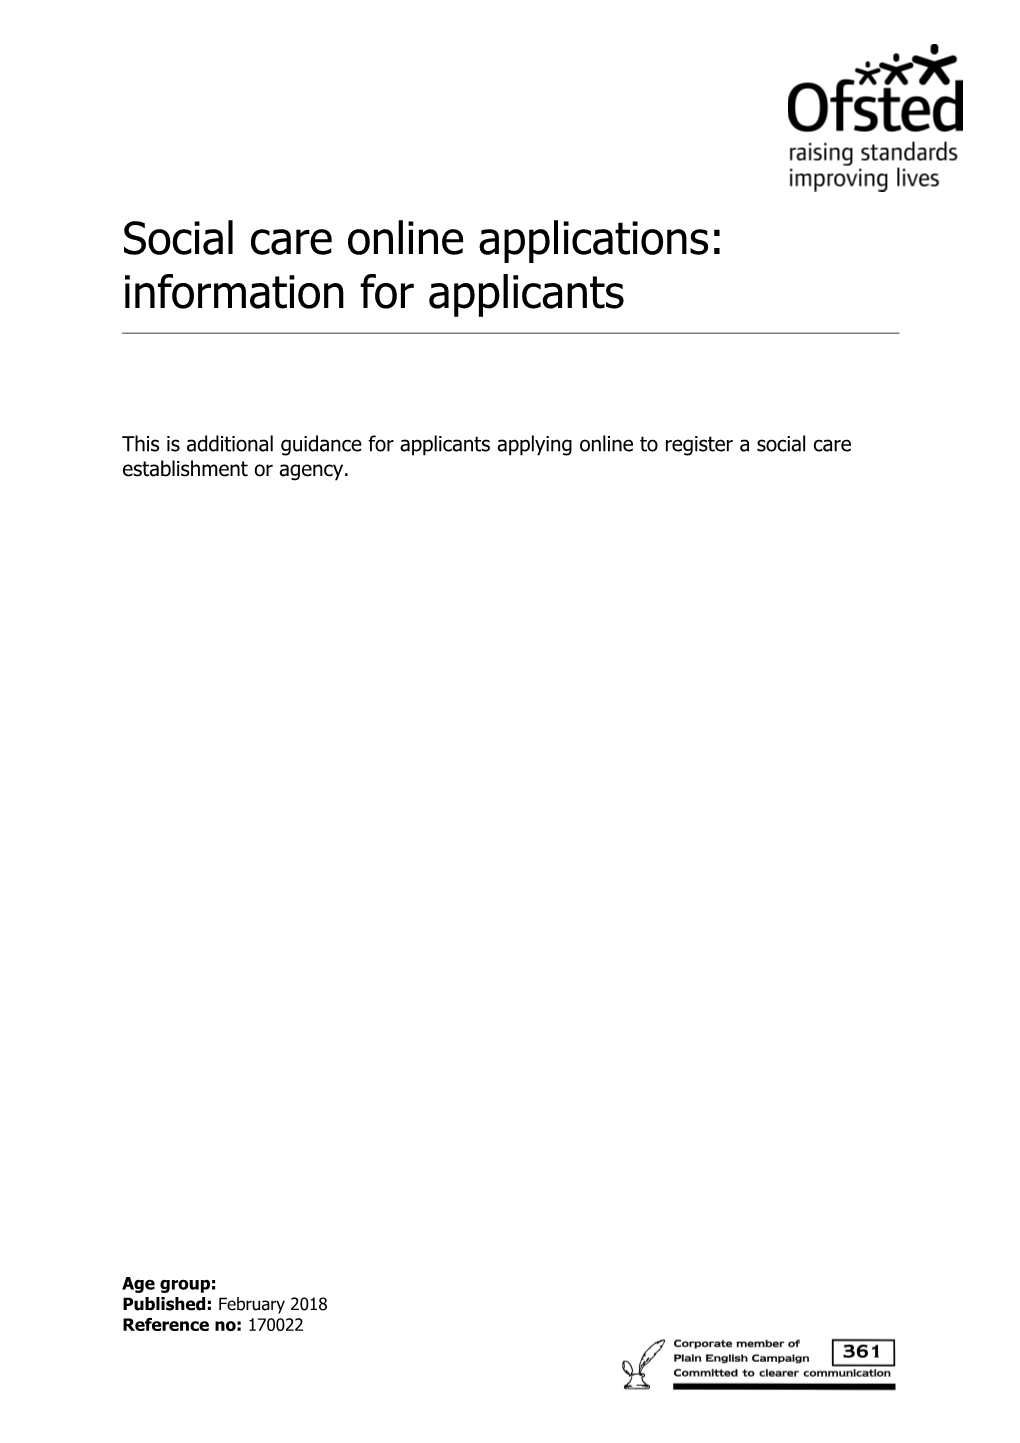 Social Care Online Applications: Information for Applicants